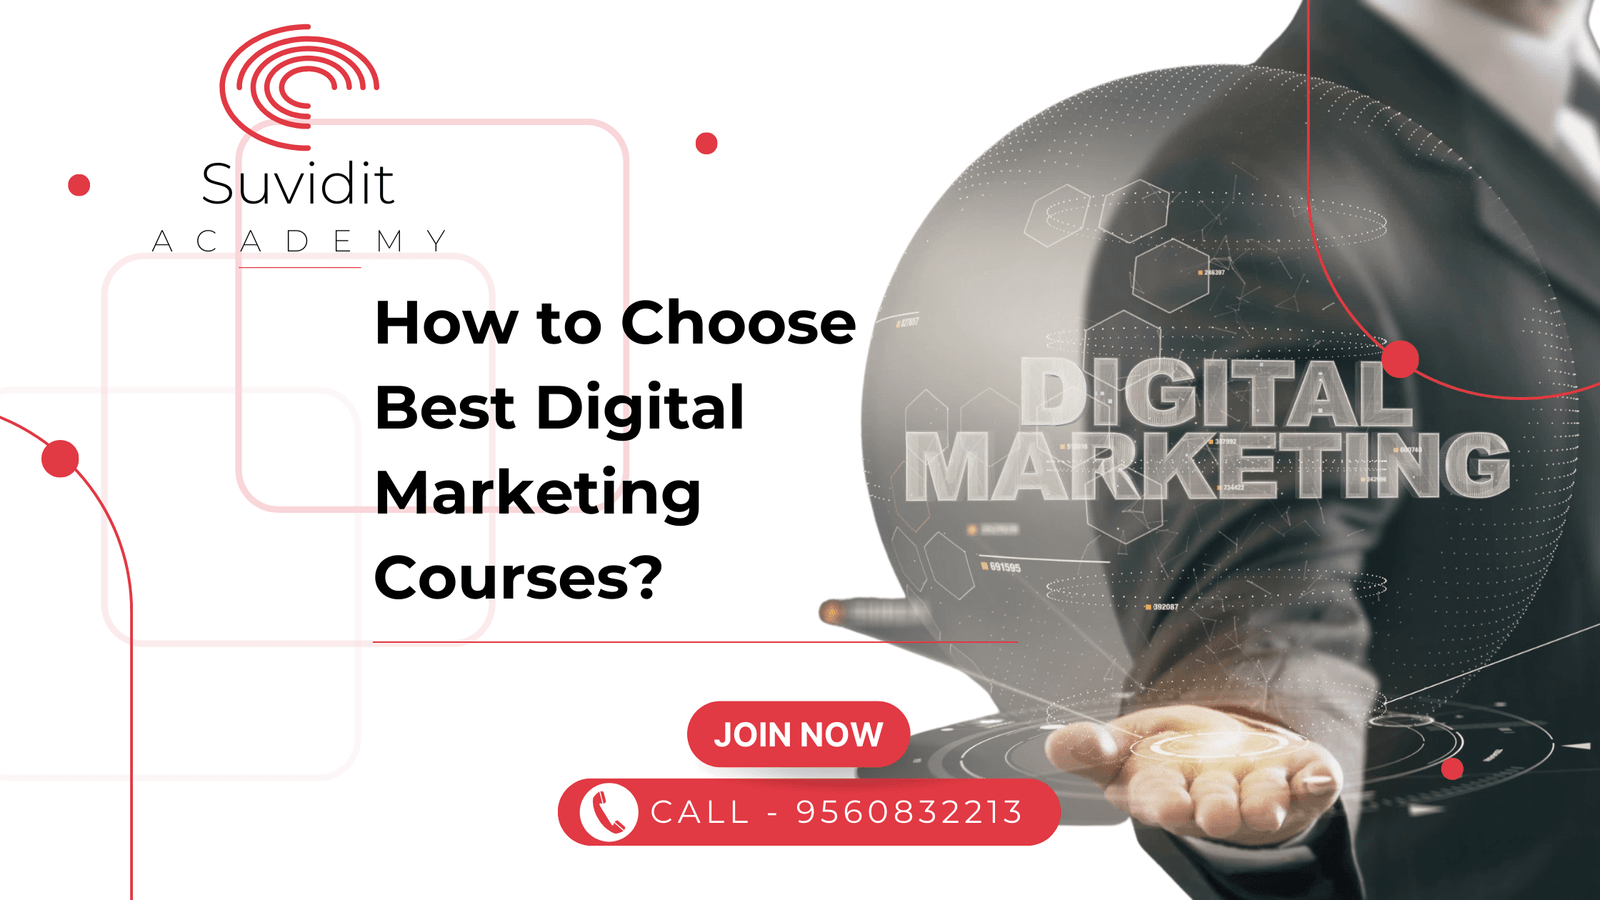 How to Choose Best Digital Marketing Courses?